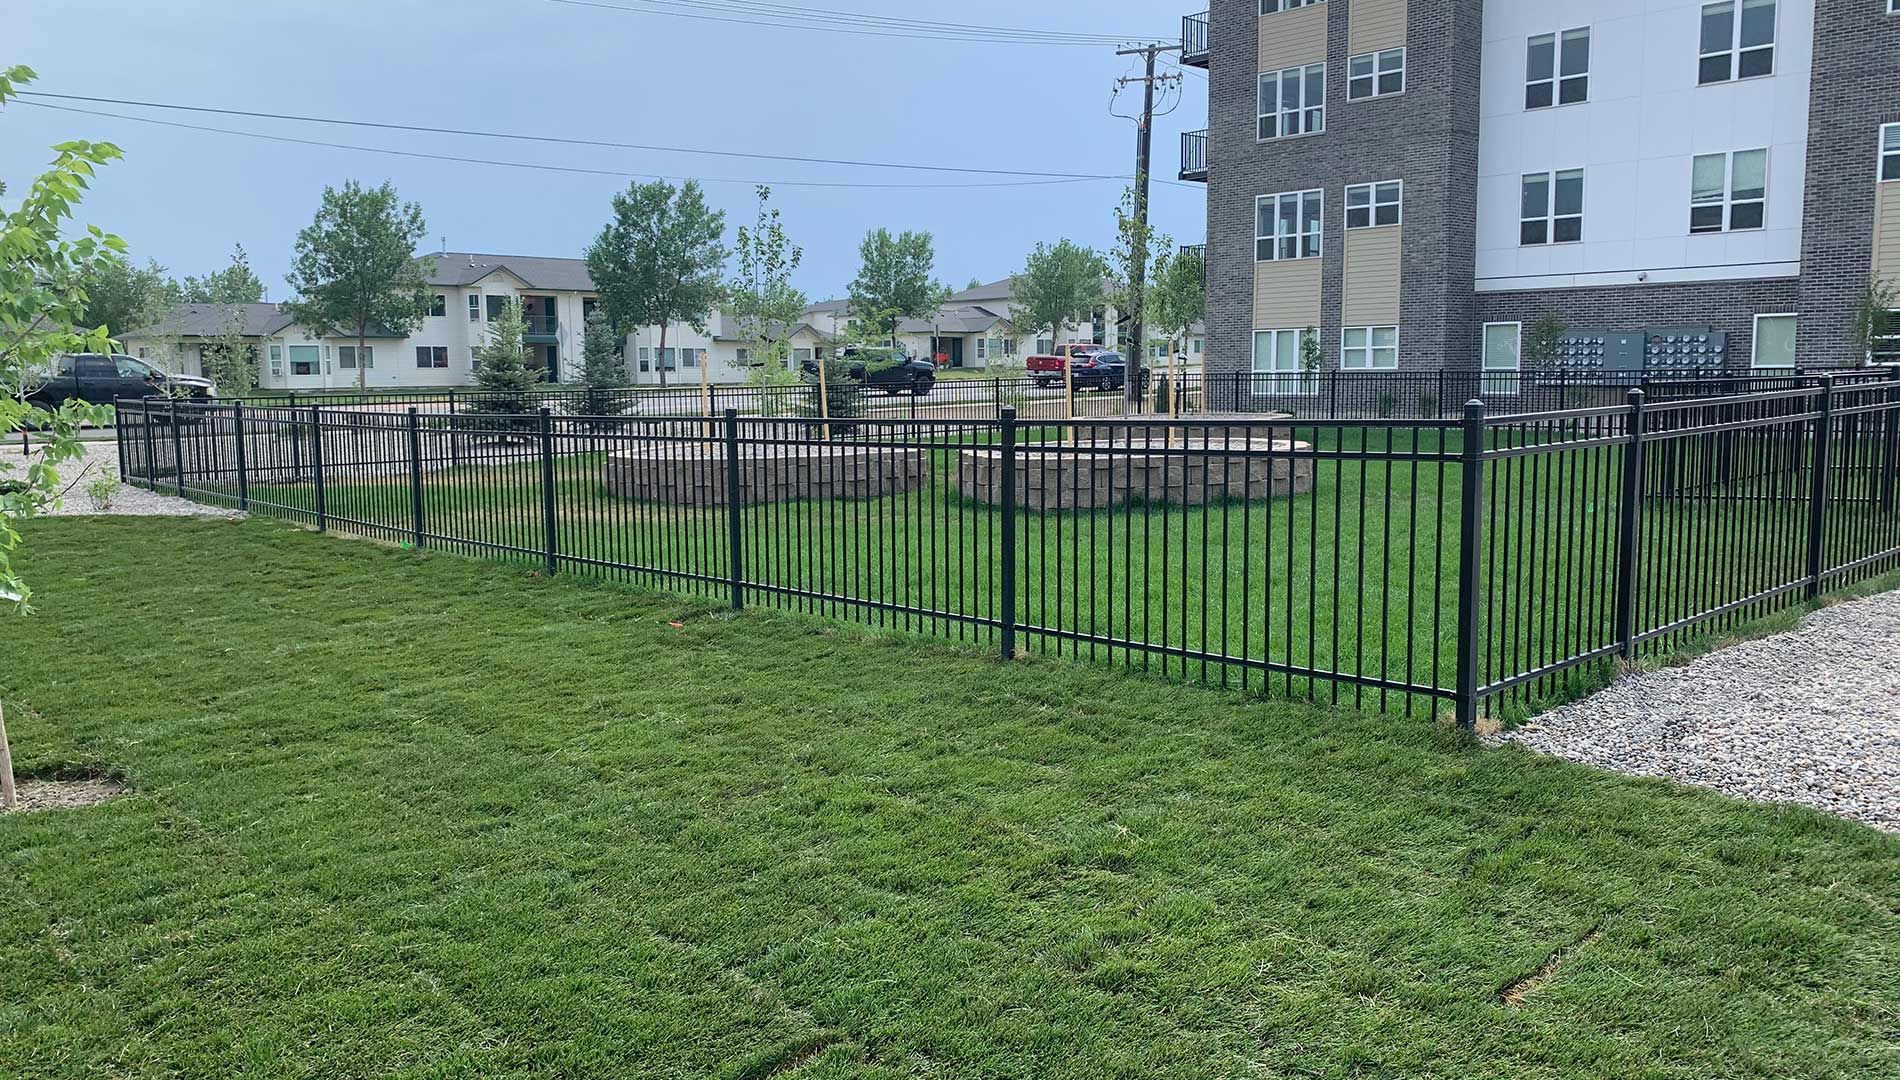 A black metal fence surrounds a lush green lawn in front of a building.